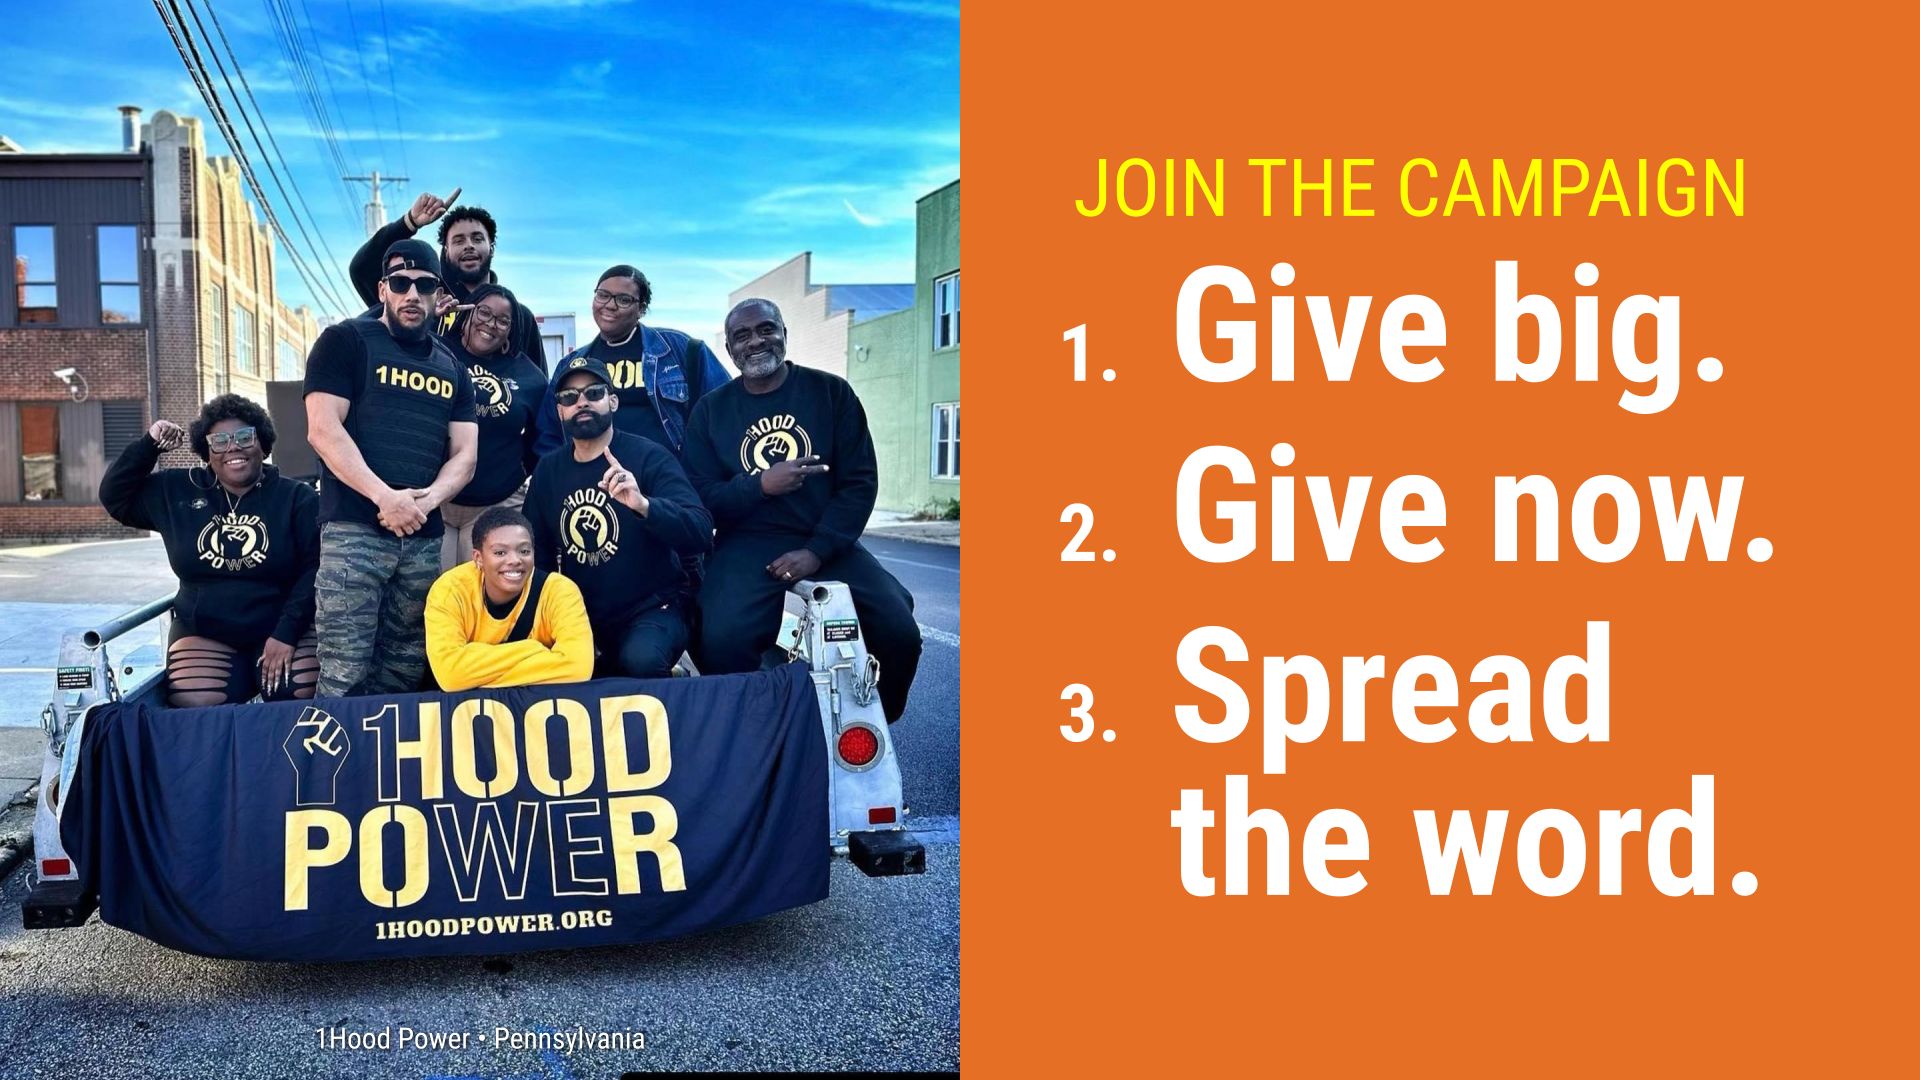 Join the Campaign: Give Big, Give Now, Spread the Word.